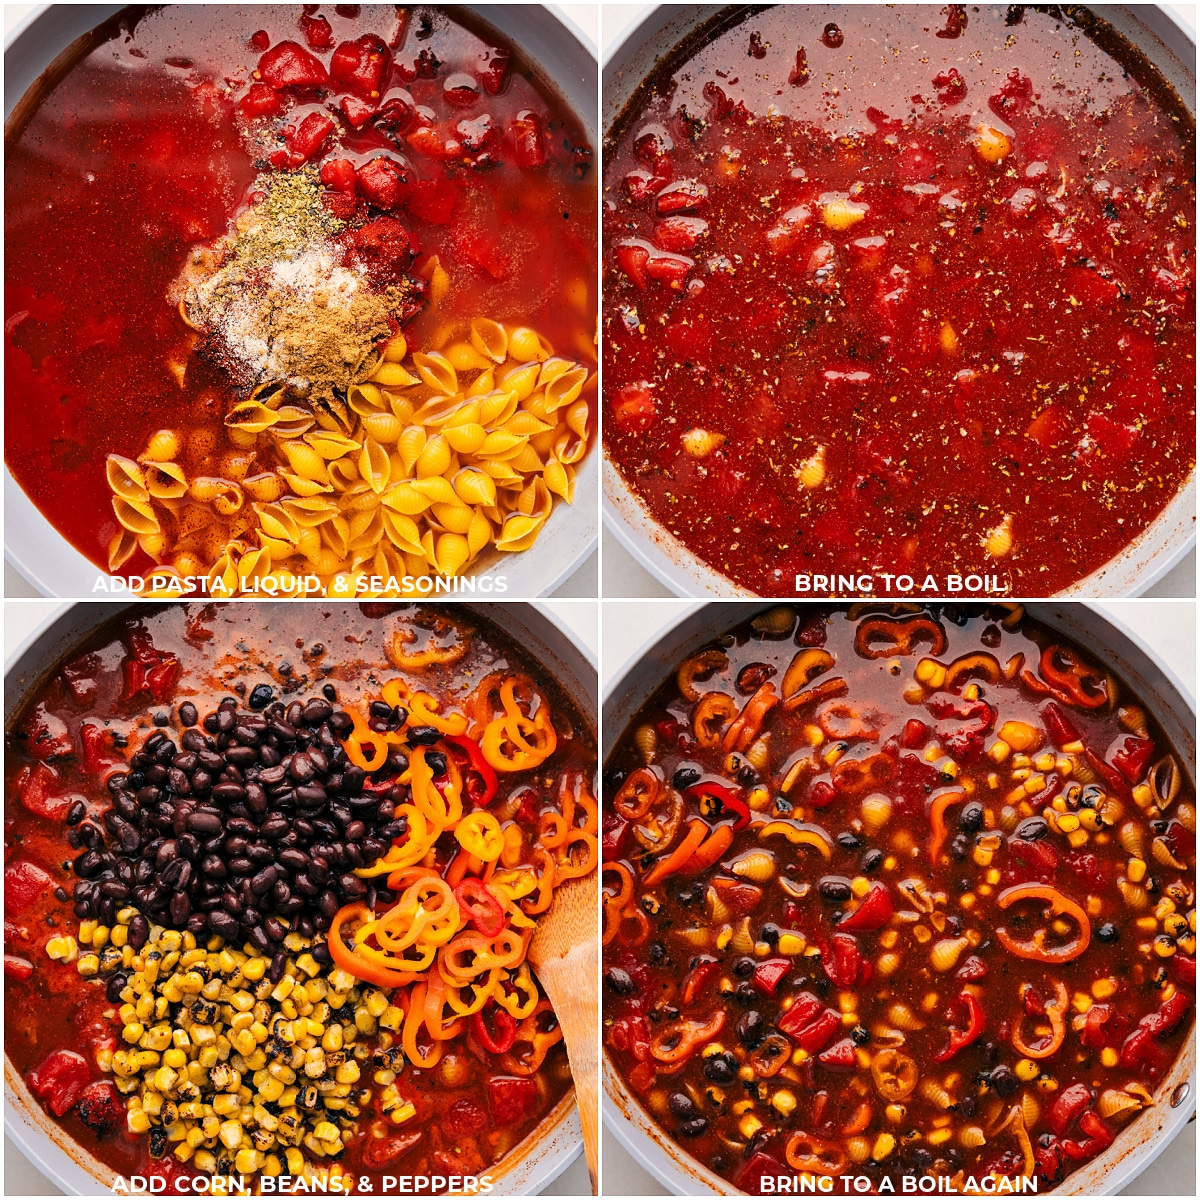 Pasta, liquid, seasonings, corn, beans, and pepper being added to a pot and it all being boiled for this enchilada pasta.